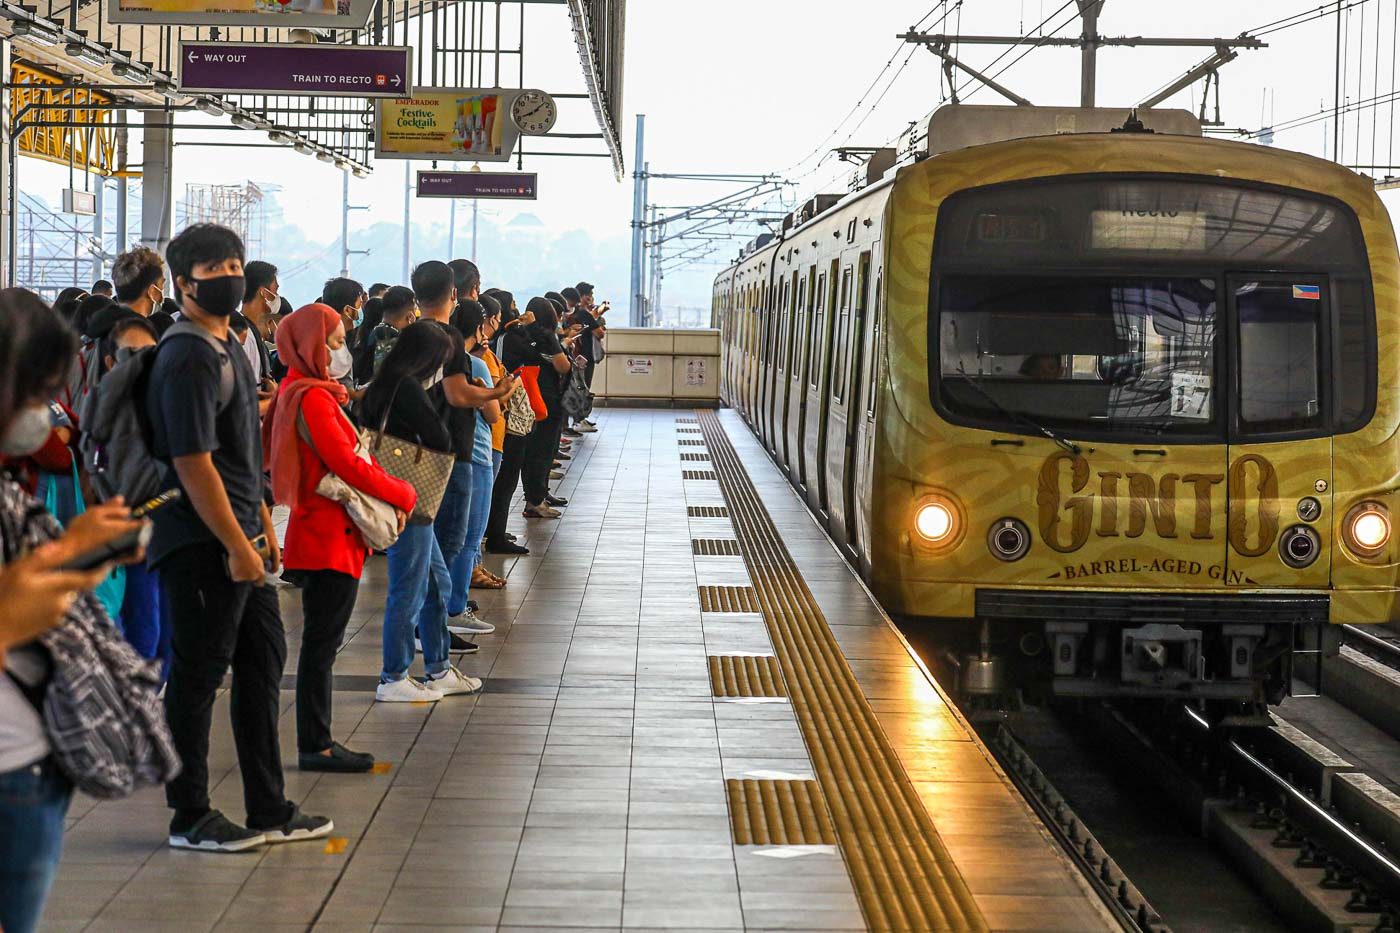 Fare hikes for LRT1 and LRT2 to take effect by August 2